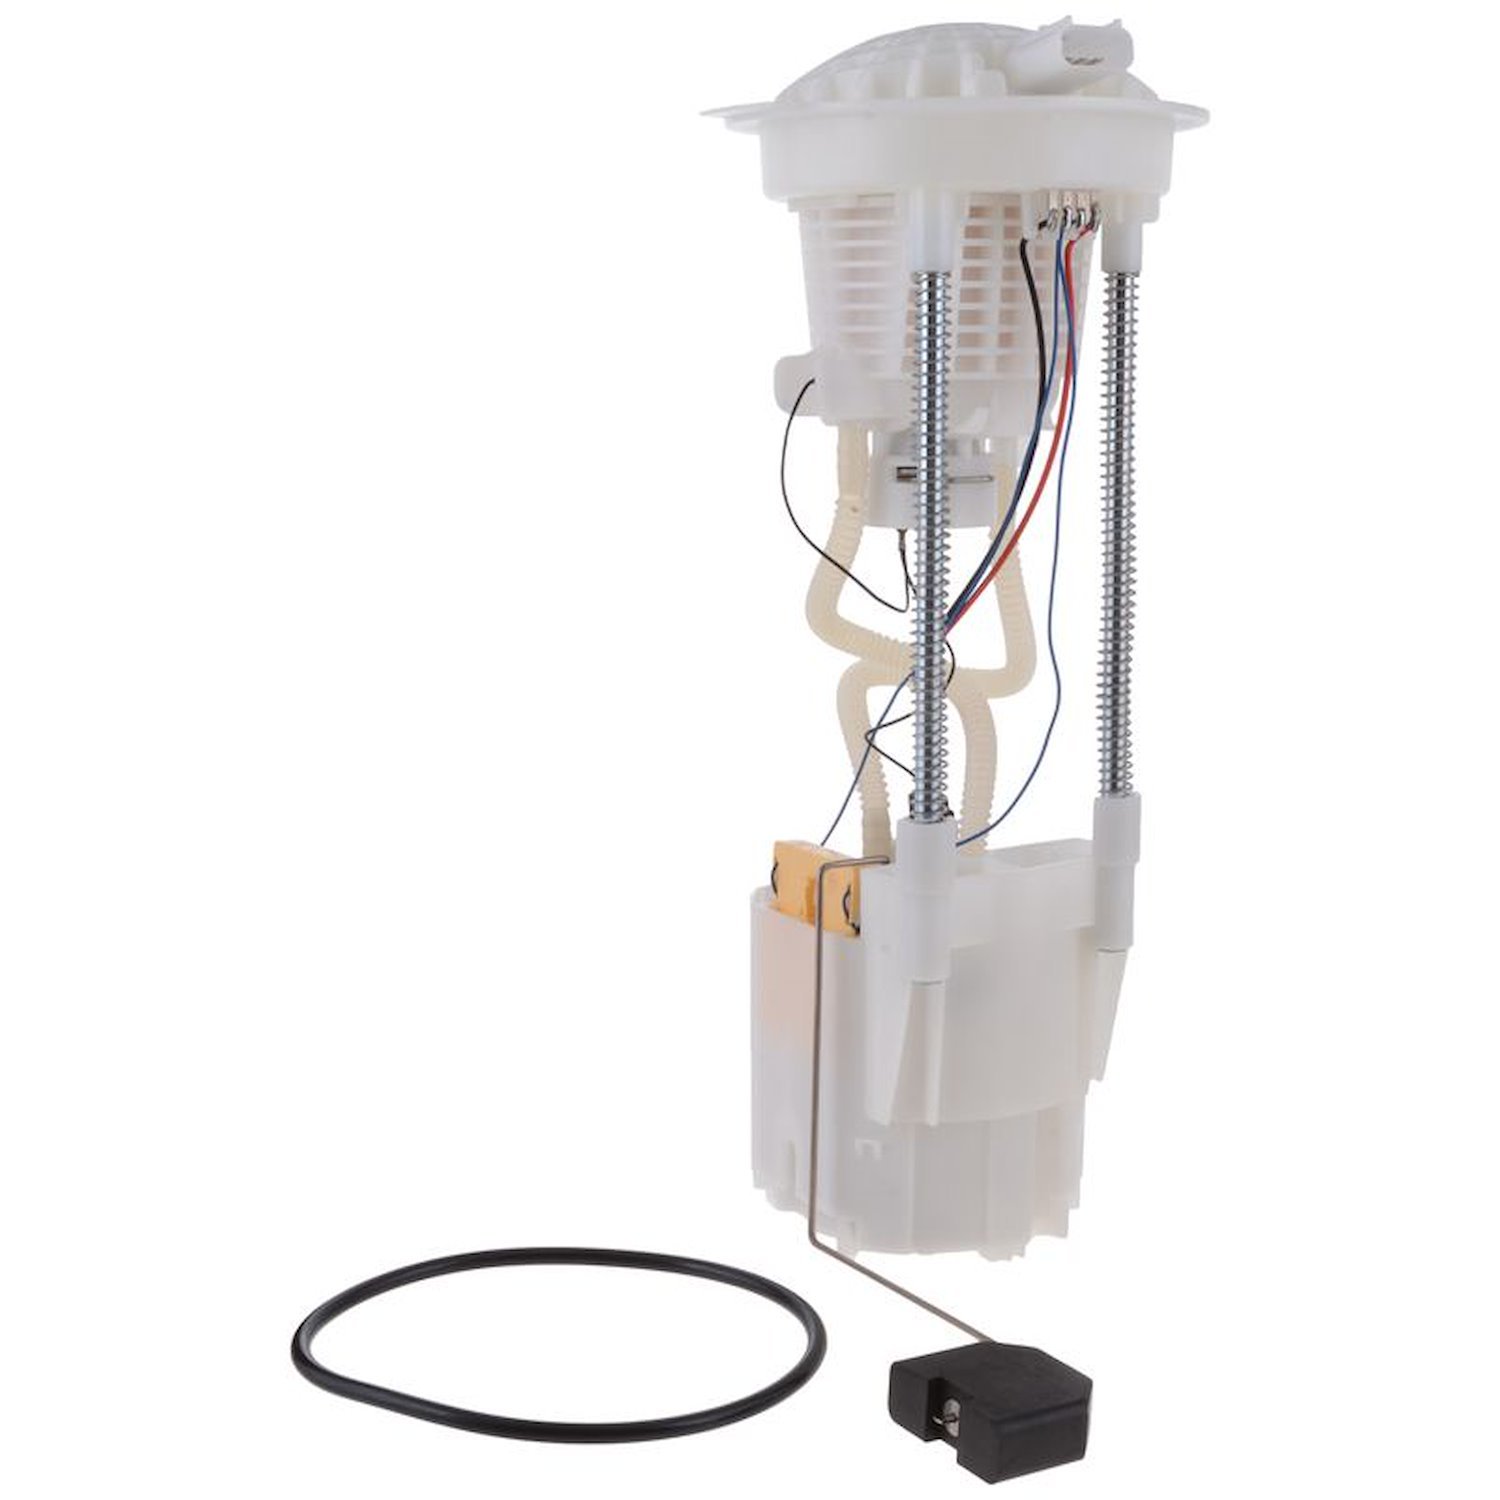 OE Chrysler/Dodge Replacement Fuel Pump Module Assembly 2004-2006